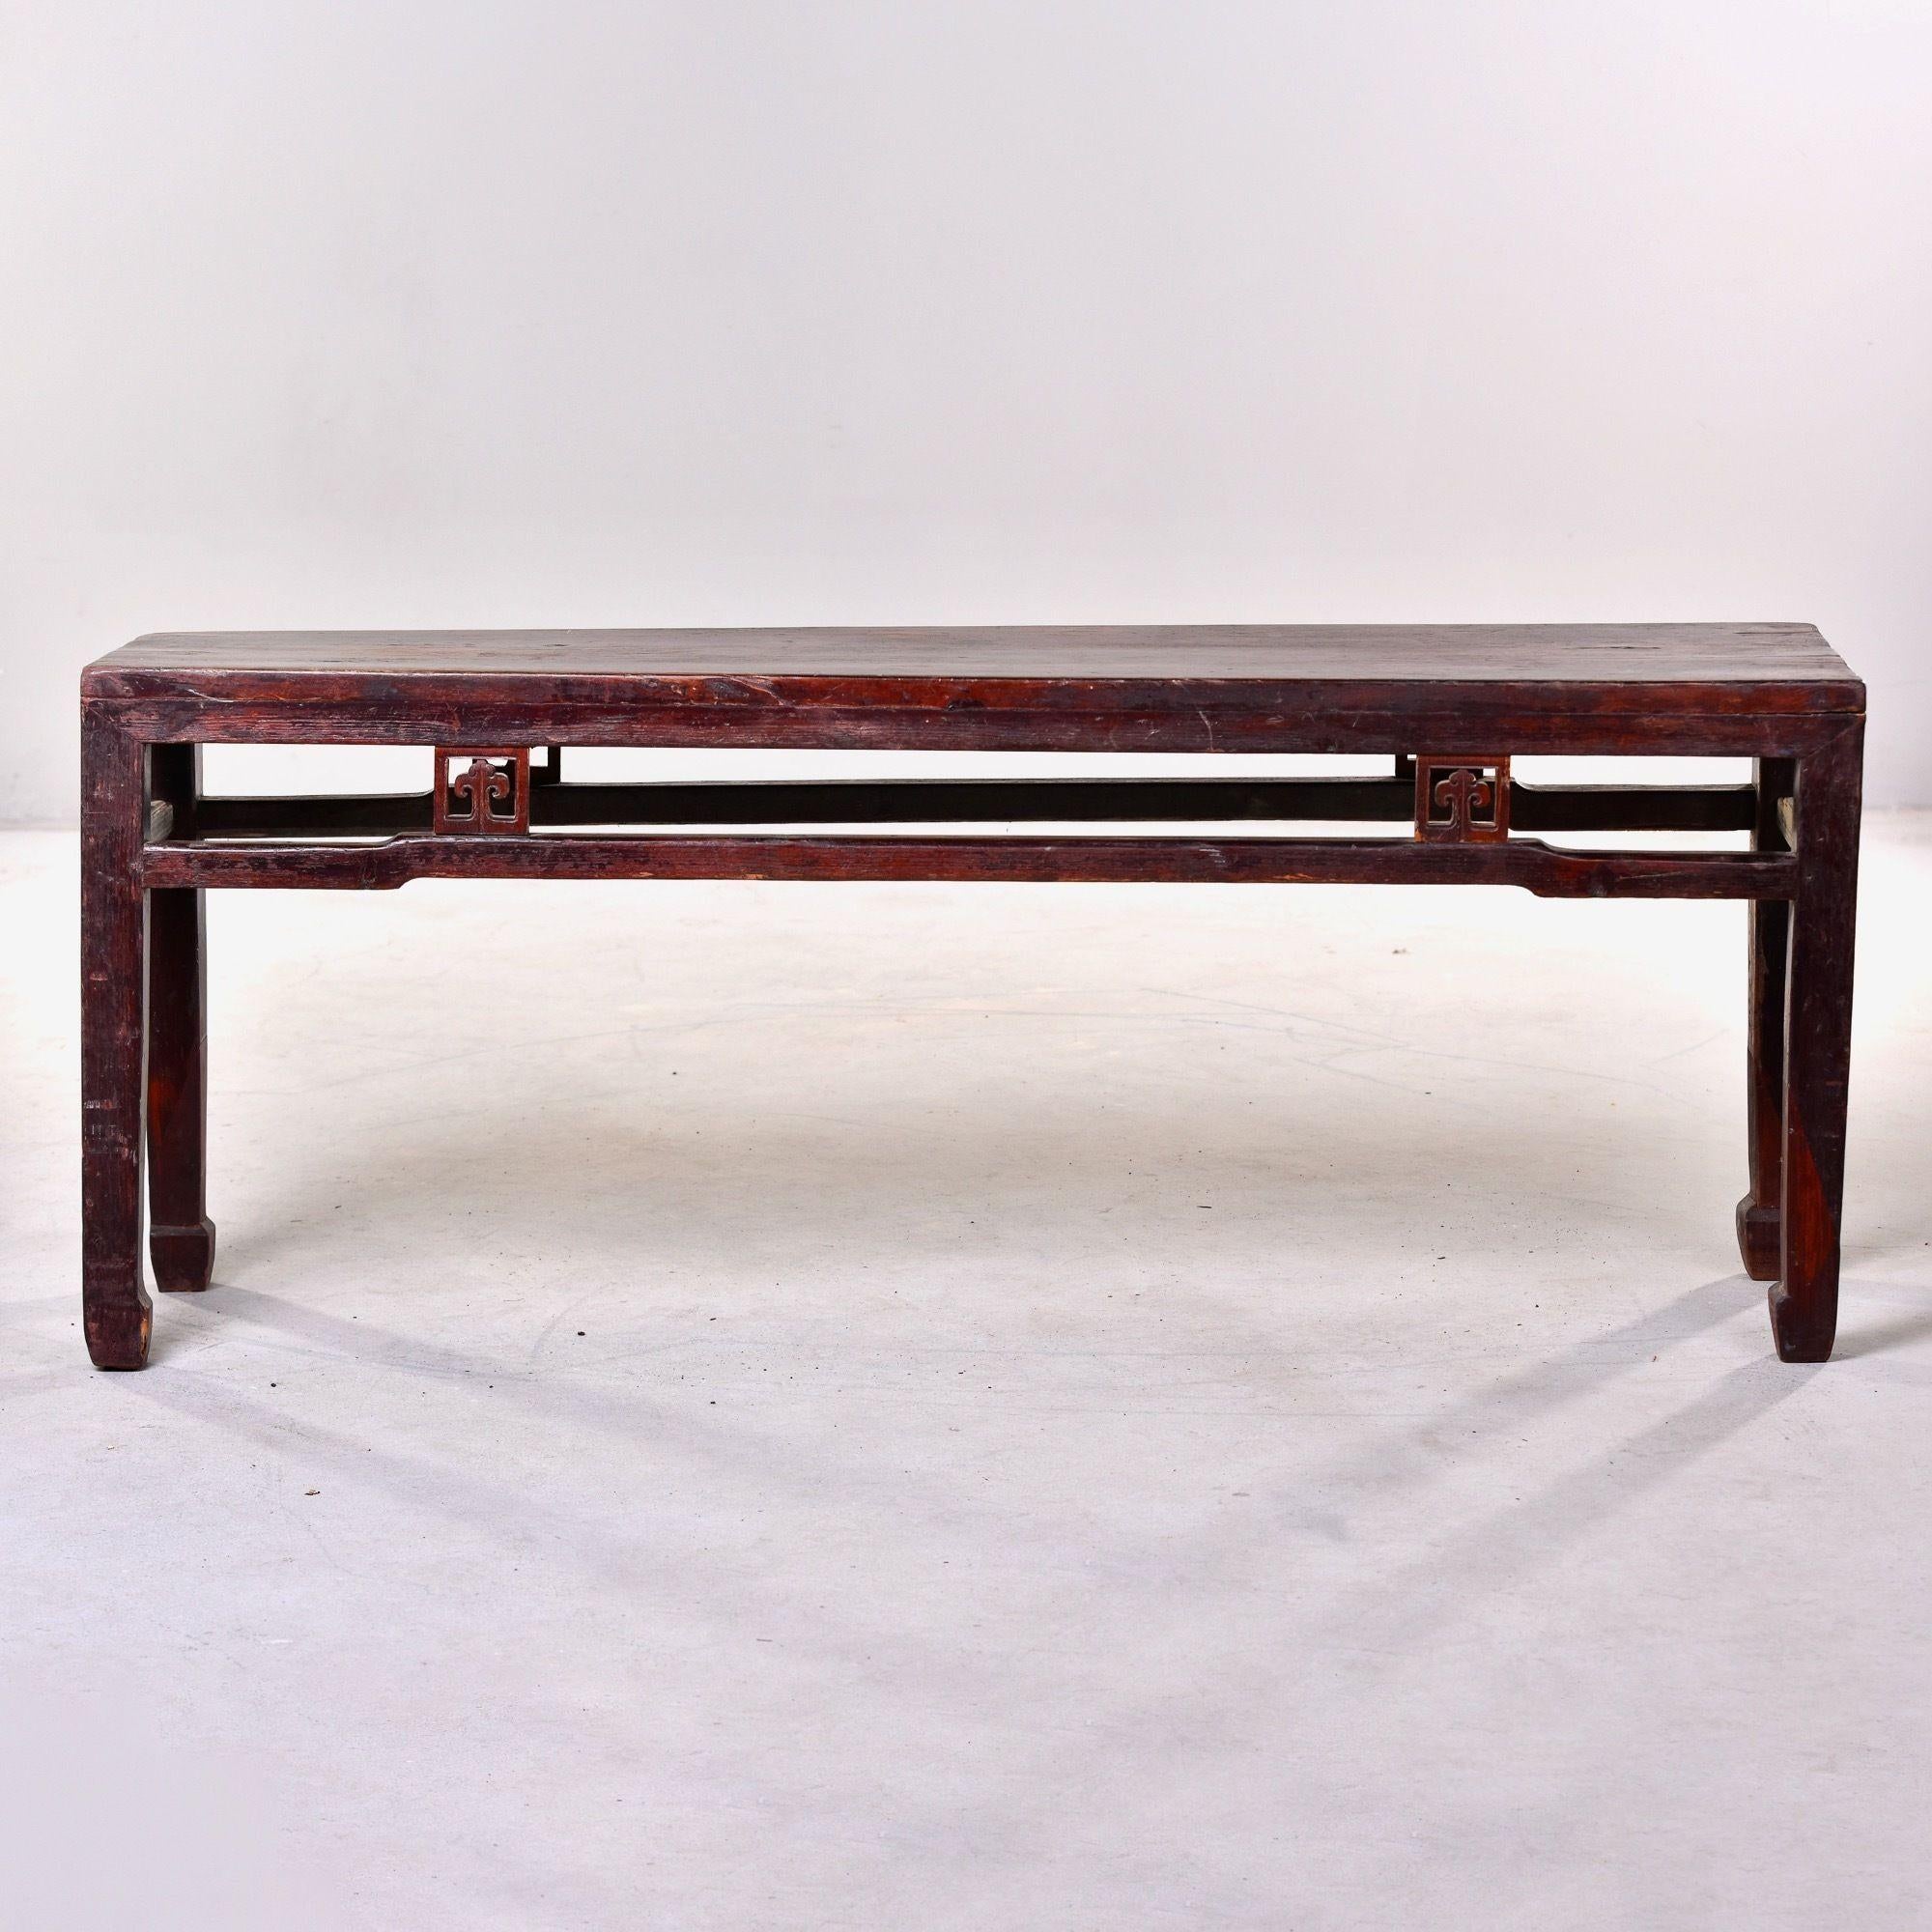 Hand-Carved Early 20th C Extra Long Chinese Elm Wood Dong Yang Bench